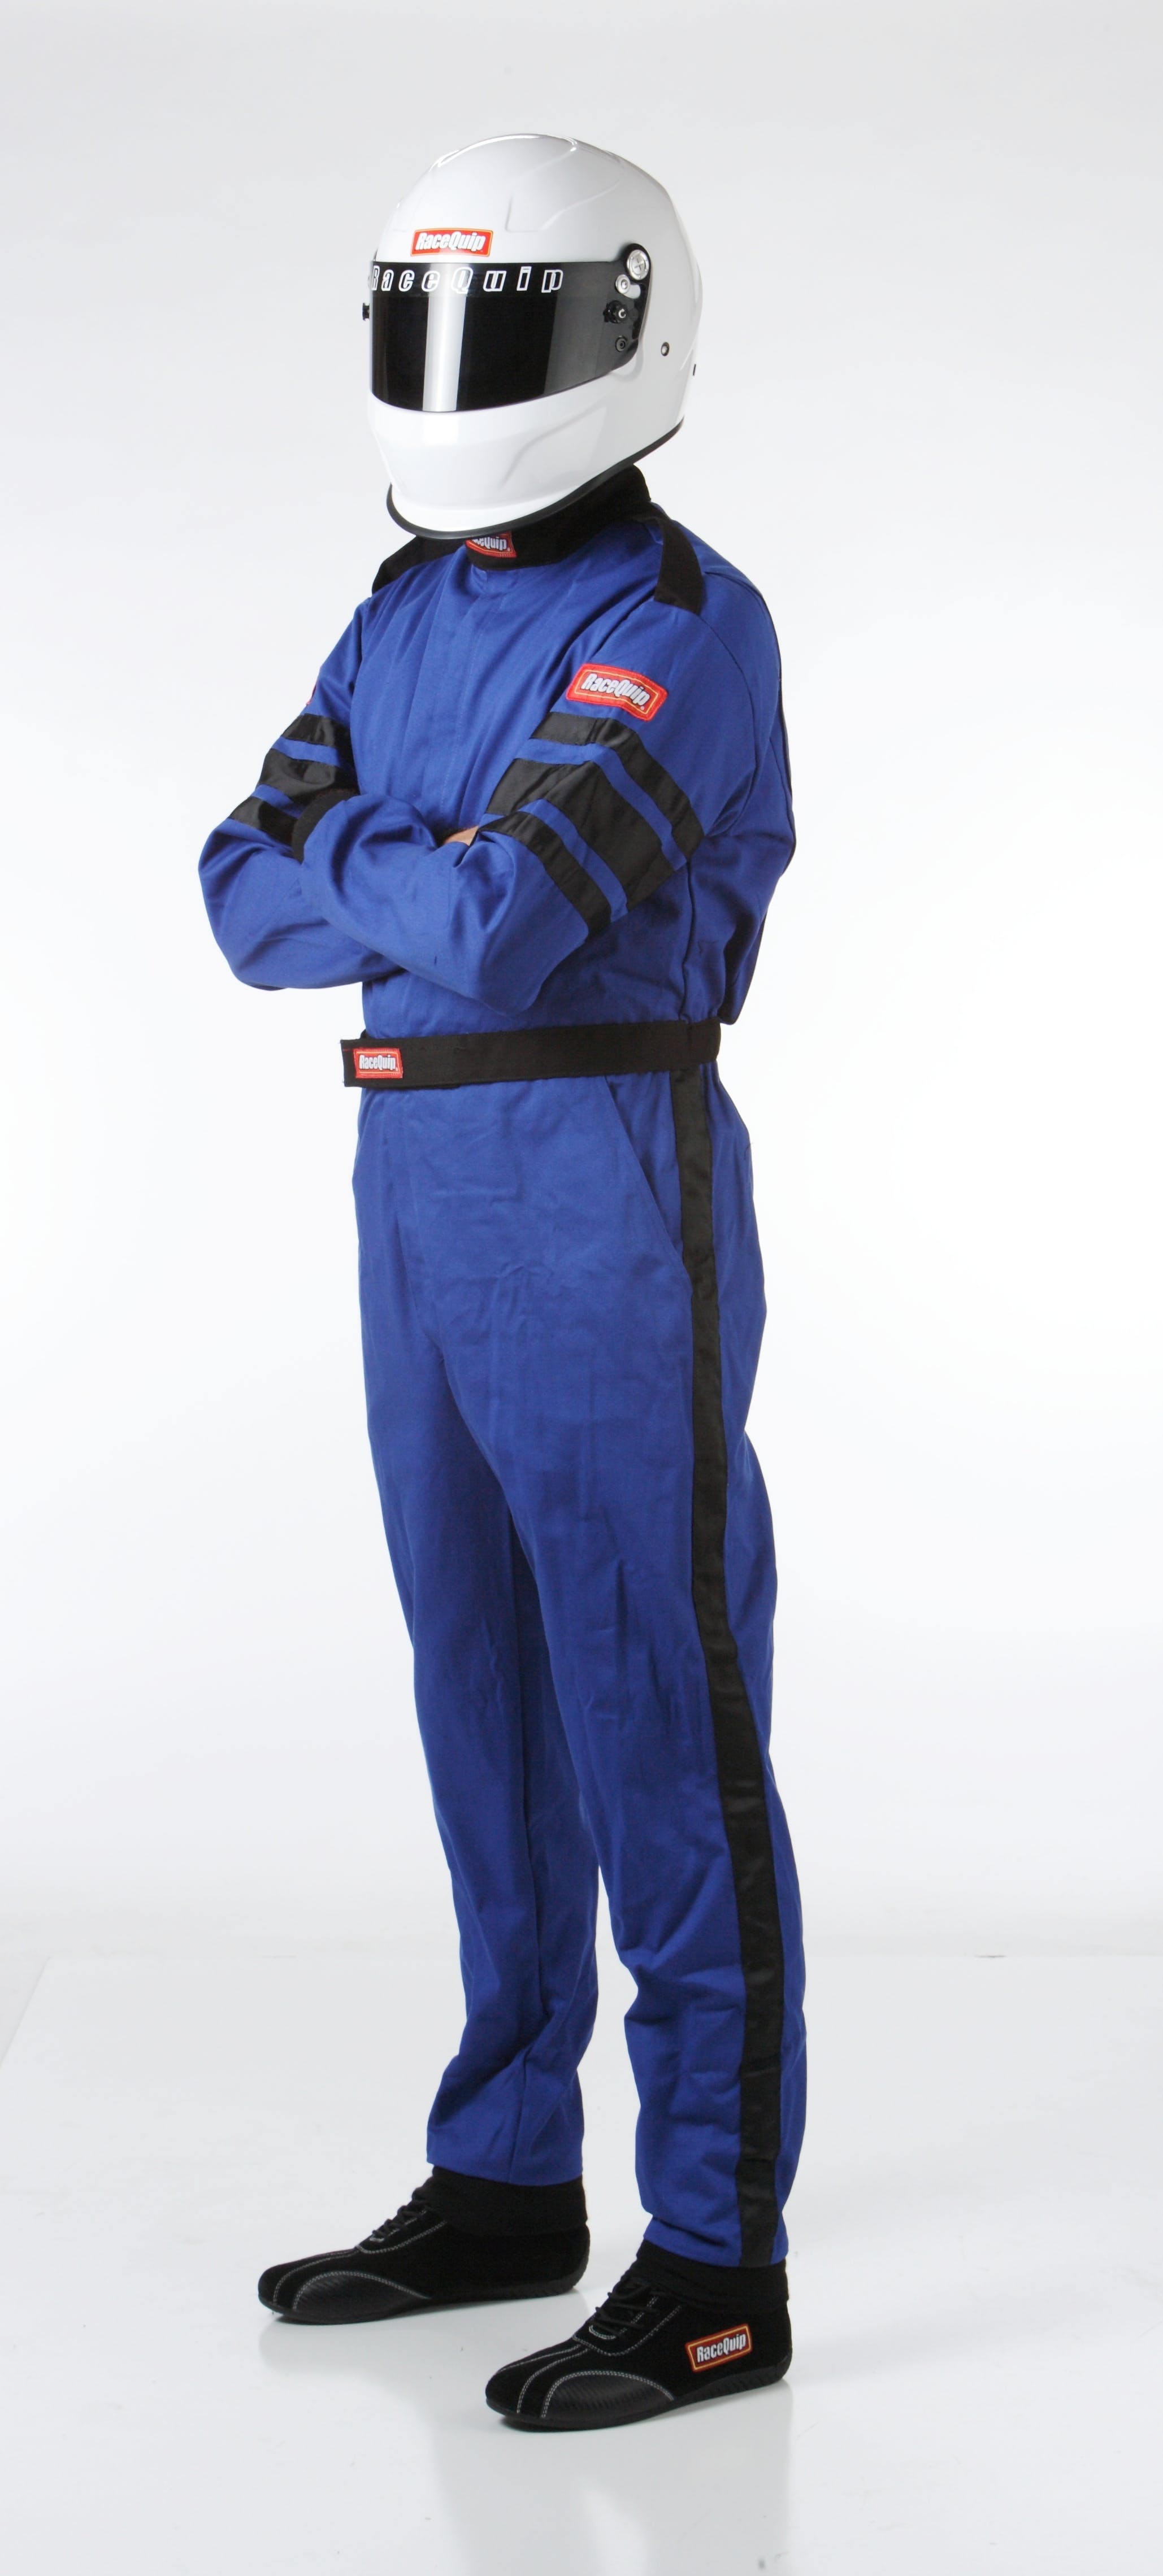 RaceQuip 110028 SFI-1 Pyrovatex One-Piece Single-Layer Racing Fire Suit (Blue, 3X-Large)